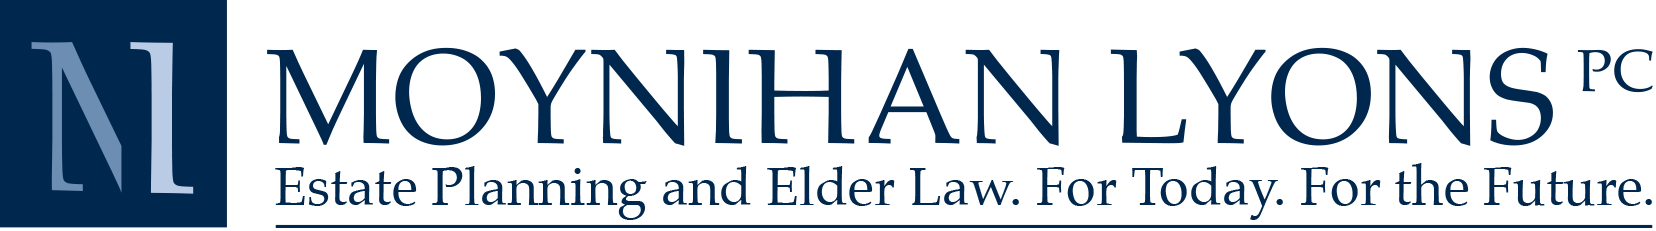 Moynihan Lyons PC, Estate Planning and Elder Law. For Today. For the Future.